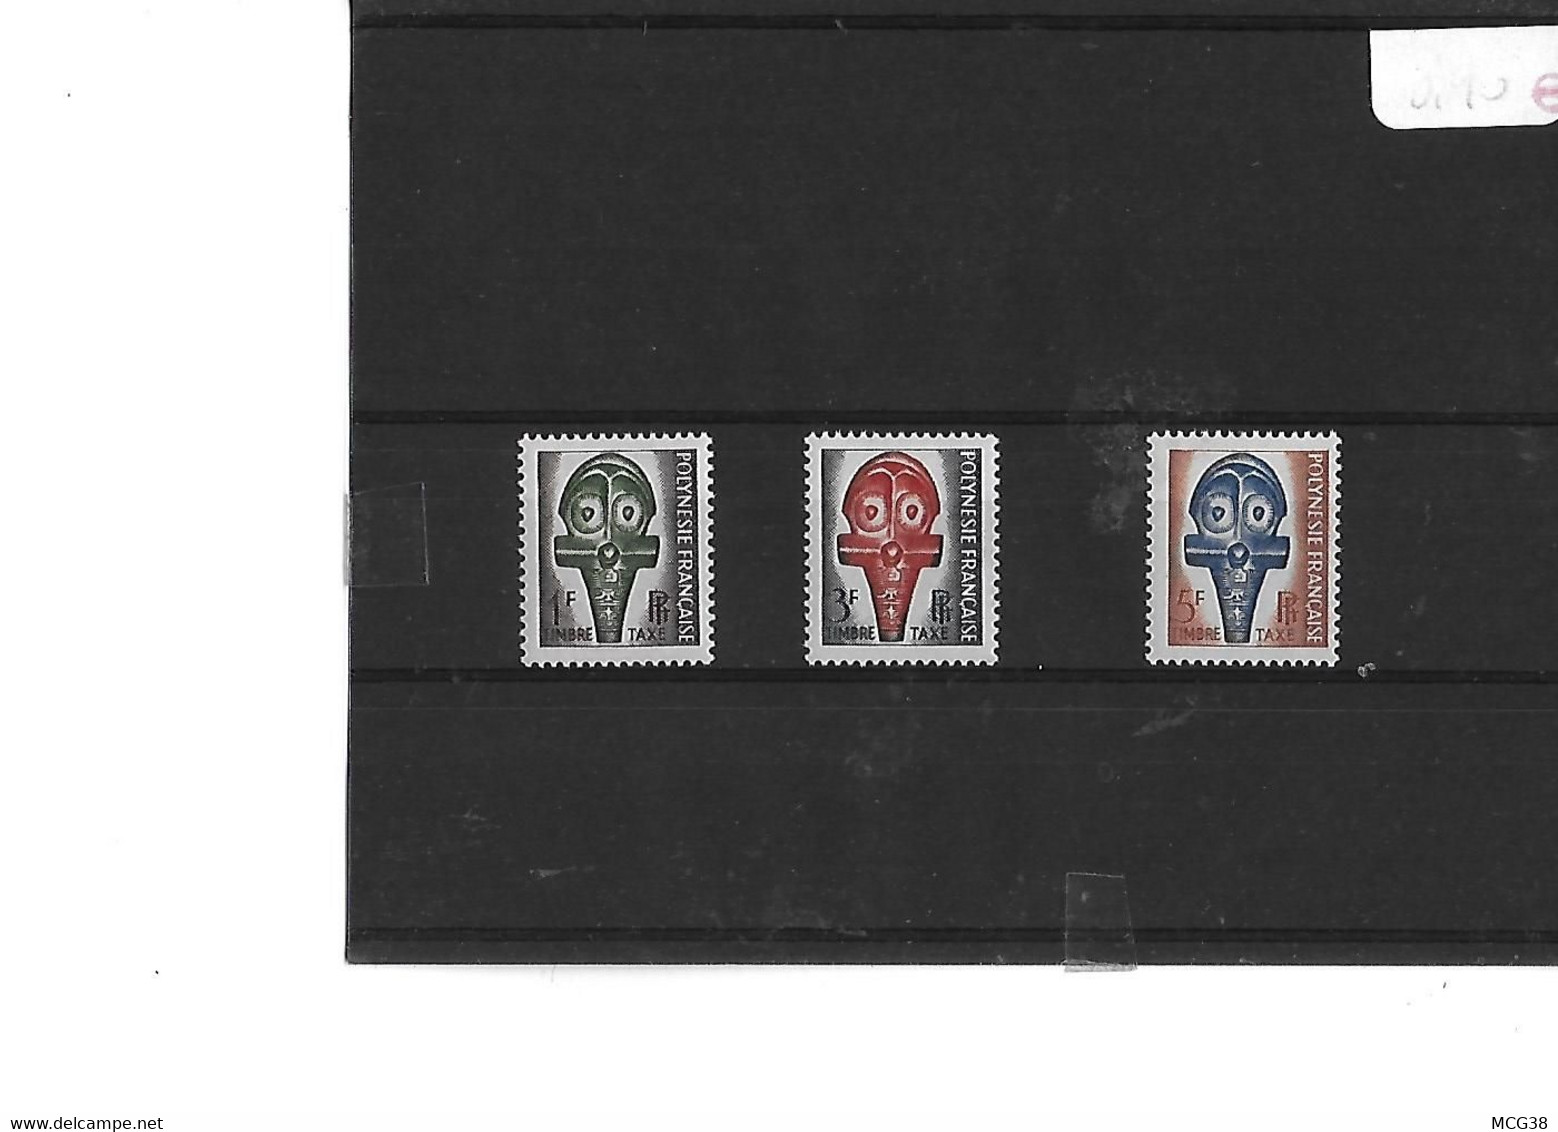 POLYNESIE  -  TIMBRES  TAXE  NEUFS  TRACE  CHARNIERE  -  SERIE   N°  1    à  3 - Timbres-taxe